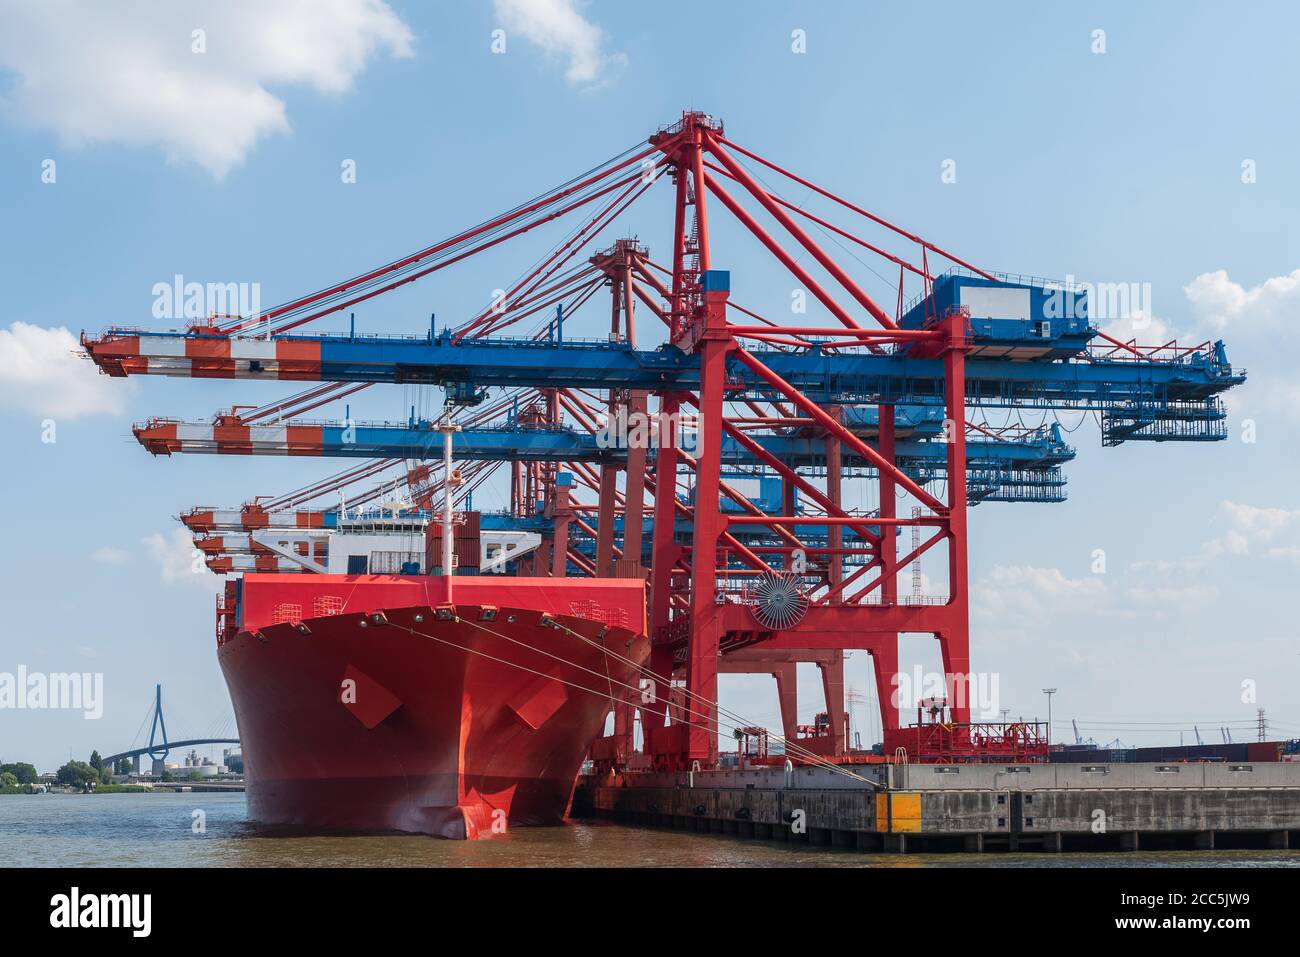 waterside view of container ship and gantry cranes at commercial dock against blue sky Stock Photo